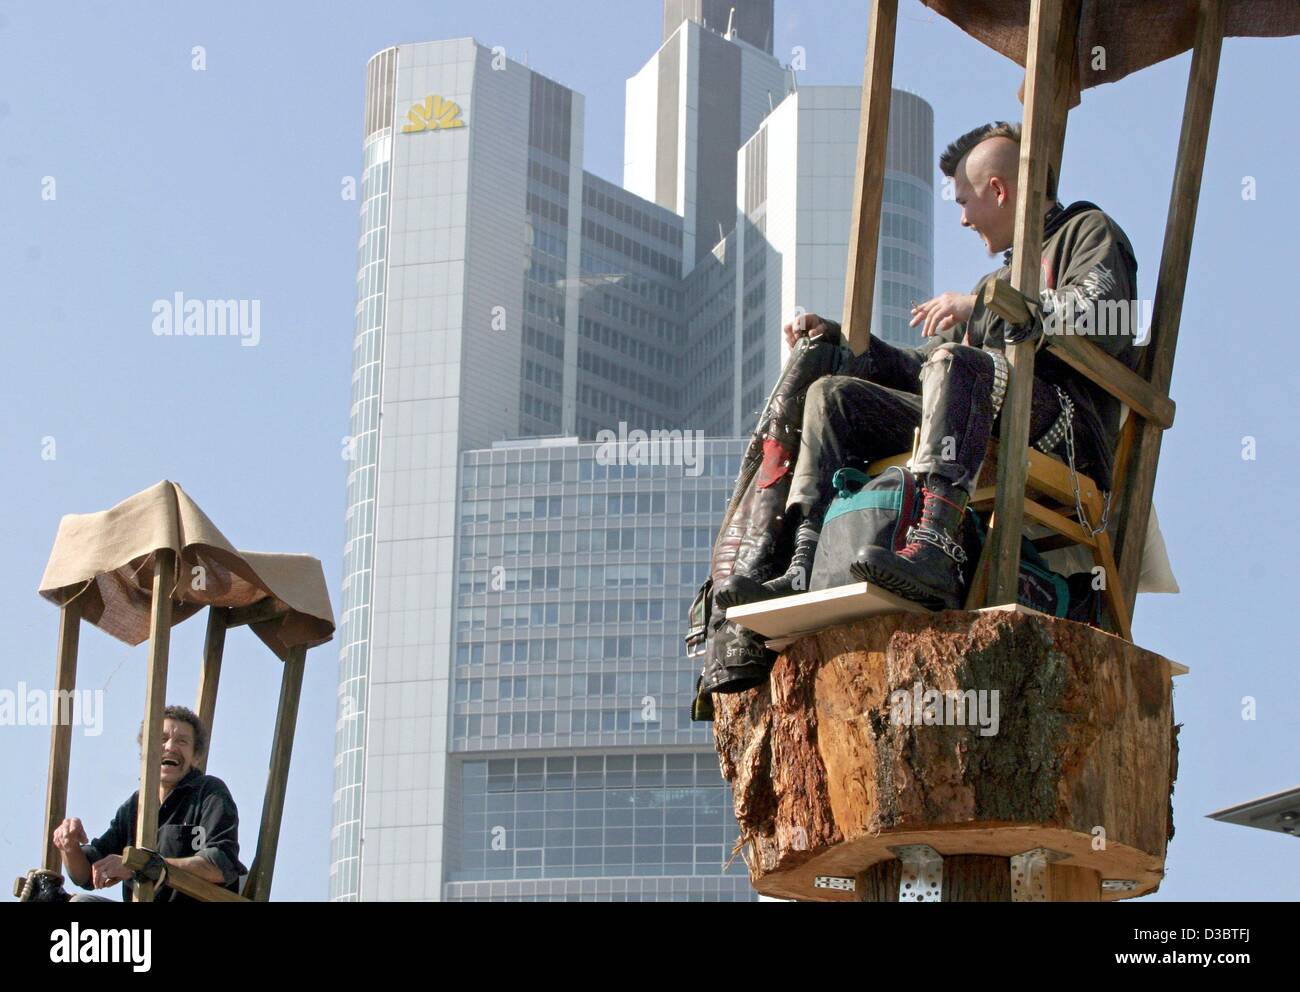 (dpa) - Two men are sitting in chairs on wooden poles, in the background the Commerzbank tower in Frankfurt, Germany, 15 September 2003. The event of the 'Church of Fear' is staged by theatre and film director Christoph Schlingensief and lasts until 20 September. Seven people who are workless, homel Stock Photo